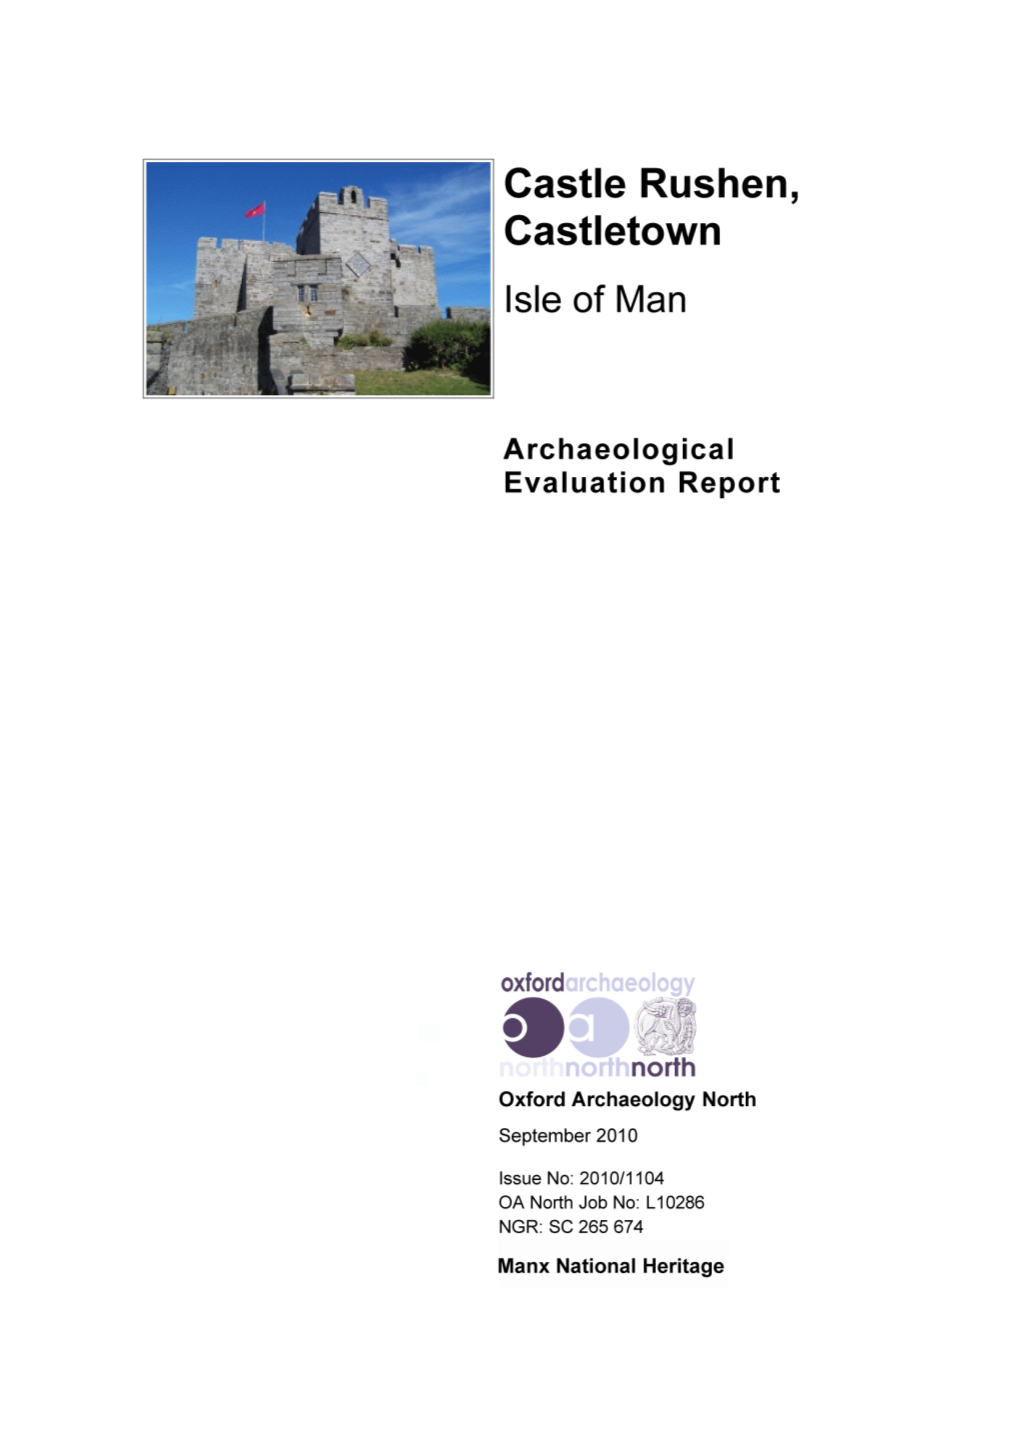 Castle Rushen, Castletown, Isle of Man: Archaeological Evaluation Report 1